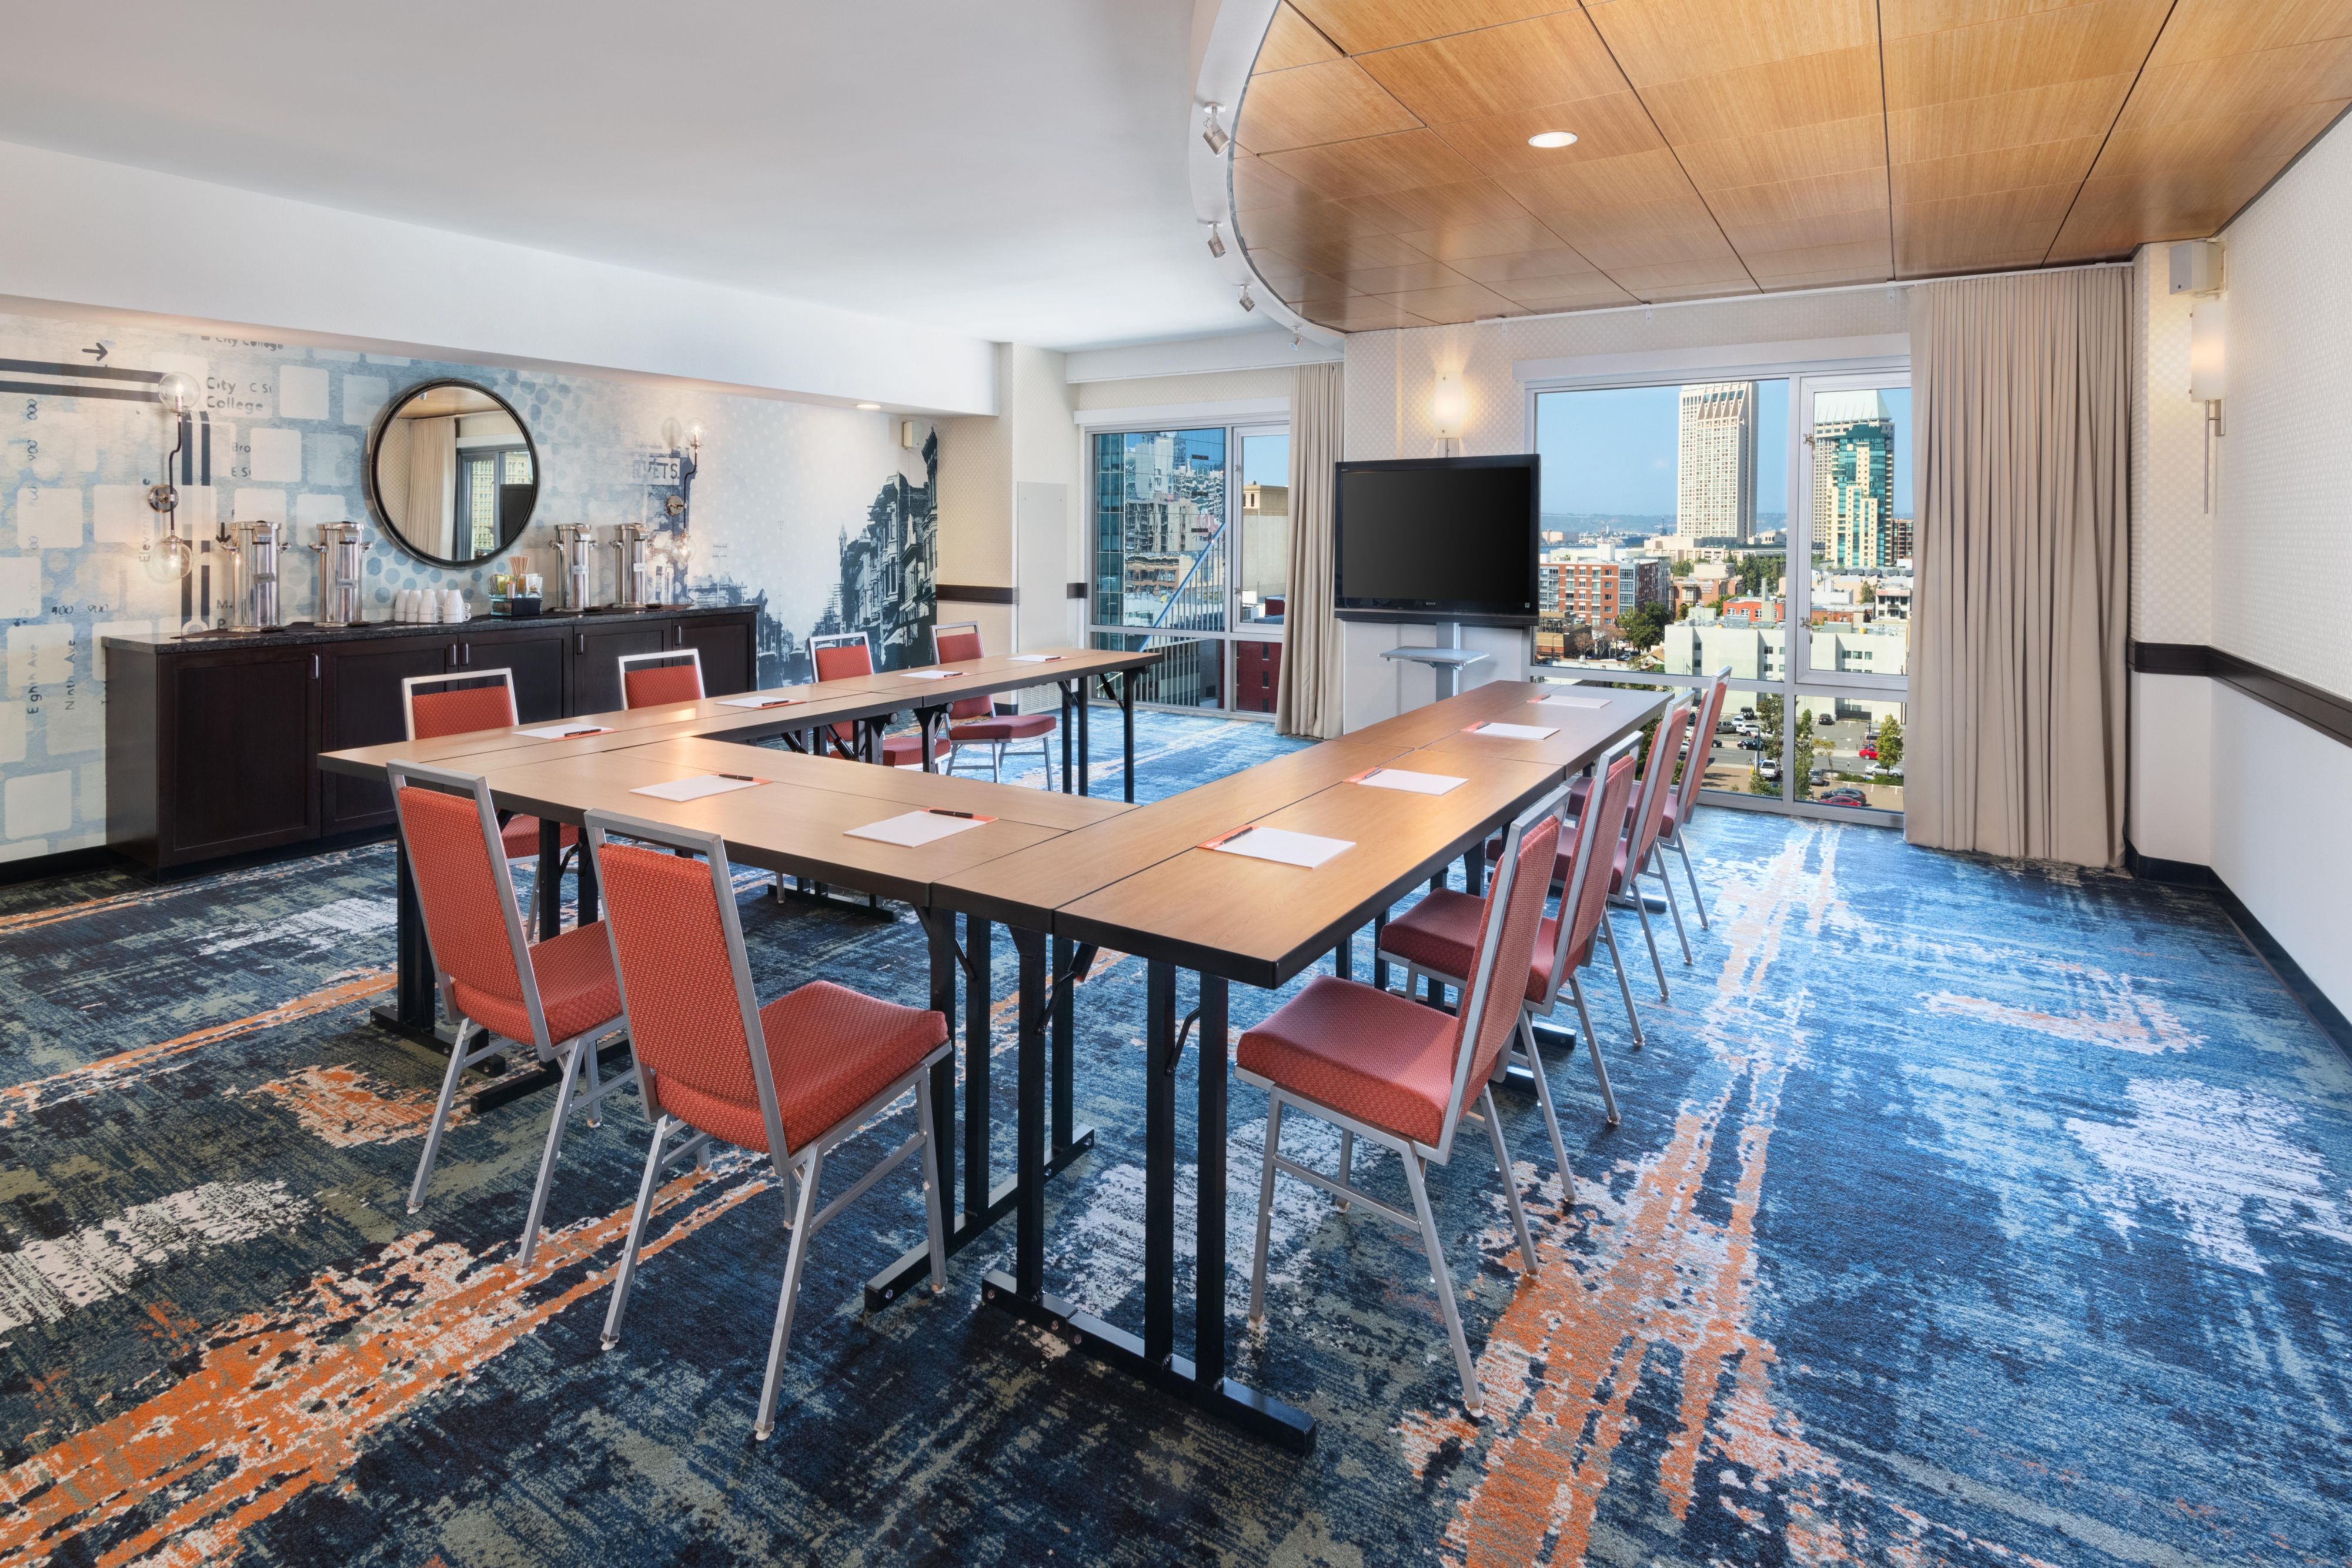 With 780 square feet of stylish meeting space, the Nautilus Room is perfect for board meetings and small-scale gatherings.